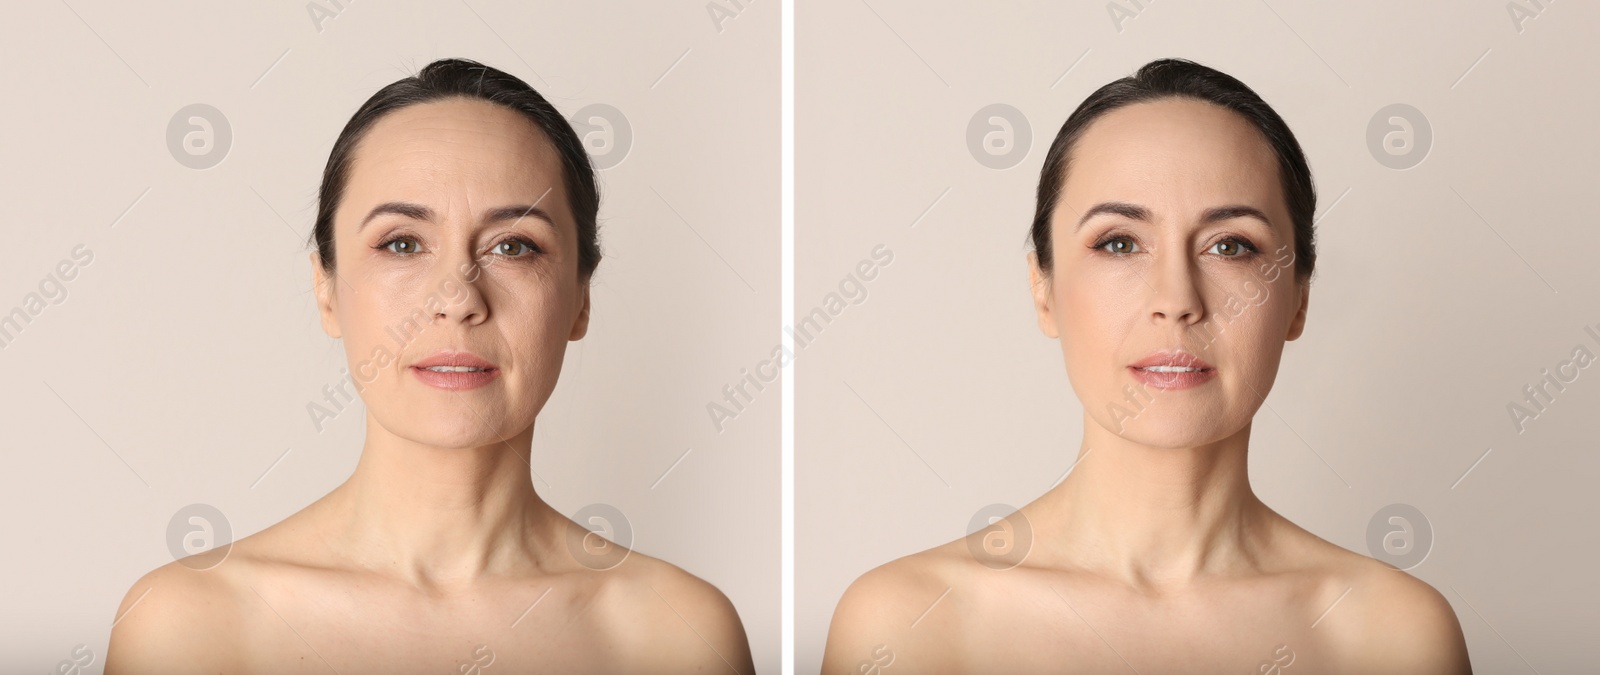 Image of Photo before and after retouch, collage. Portrait of beautiful mature woman on beige background, banner design